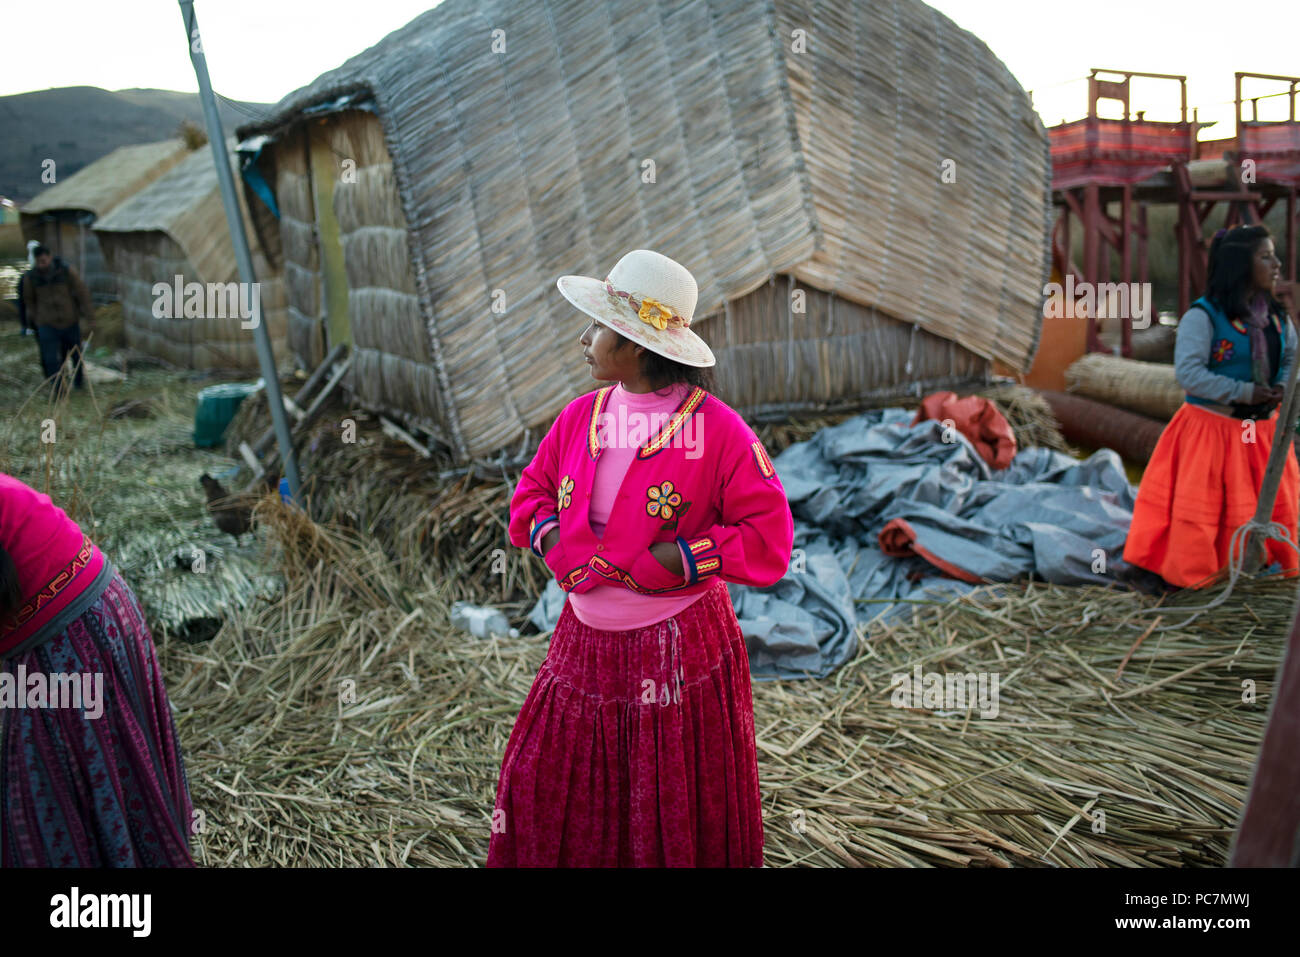 Uru (Uros) native woman in layered skirt and derby-style straw hat. If they wear a red skirt, it means they are married. Islas Flotantes, Peru. Ju2018 Stock Photo